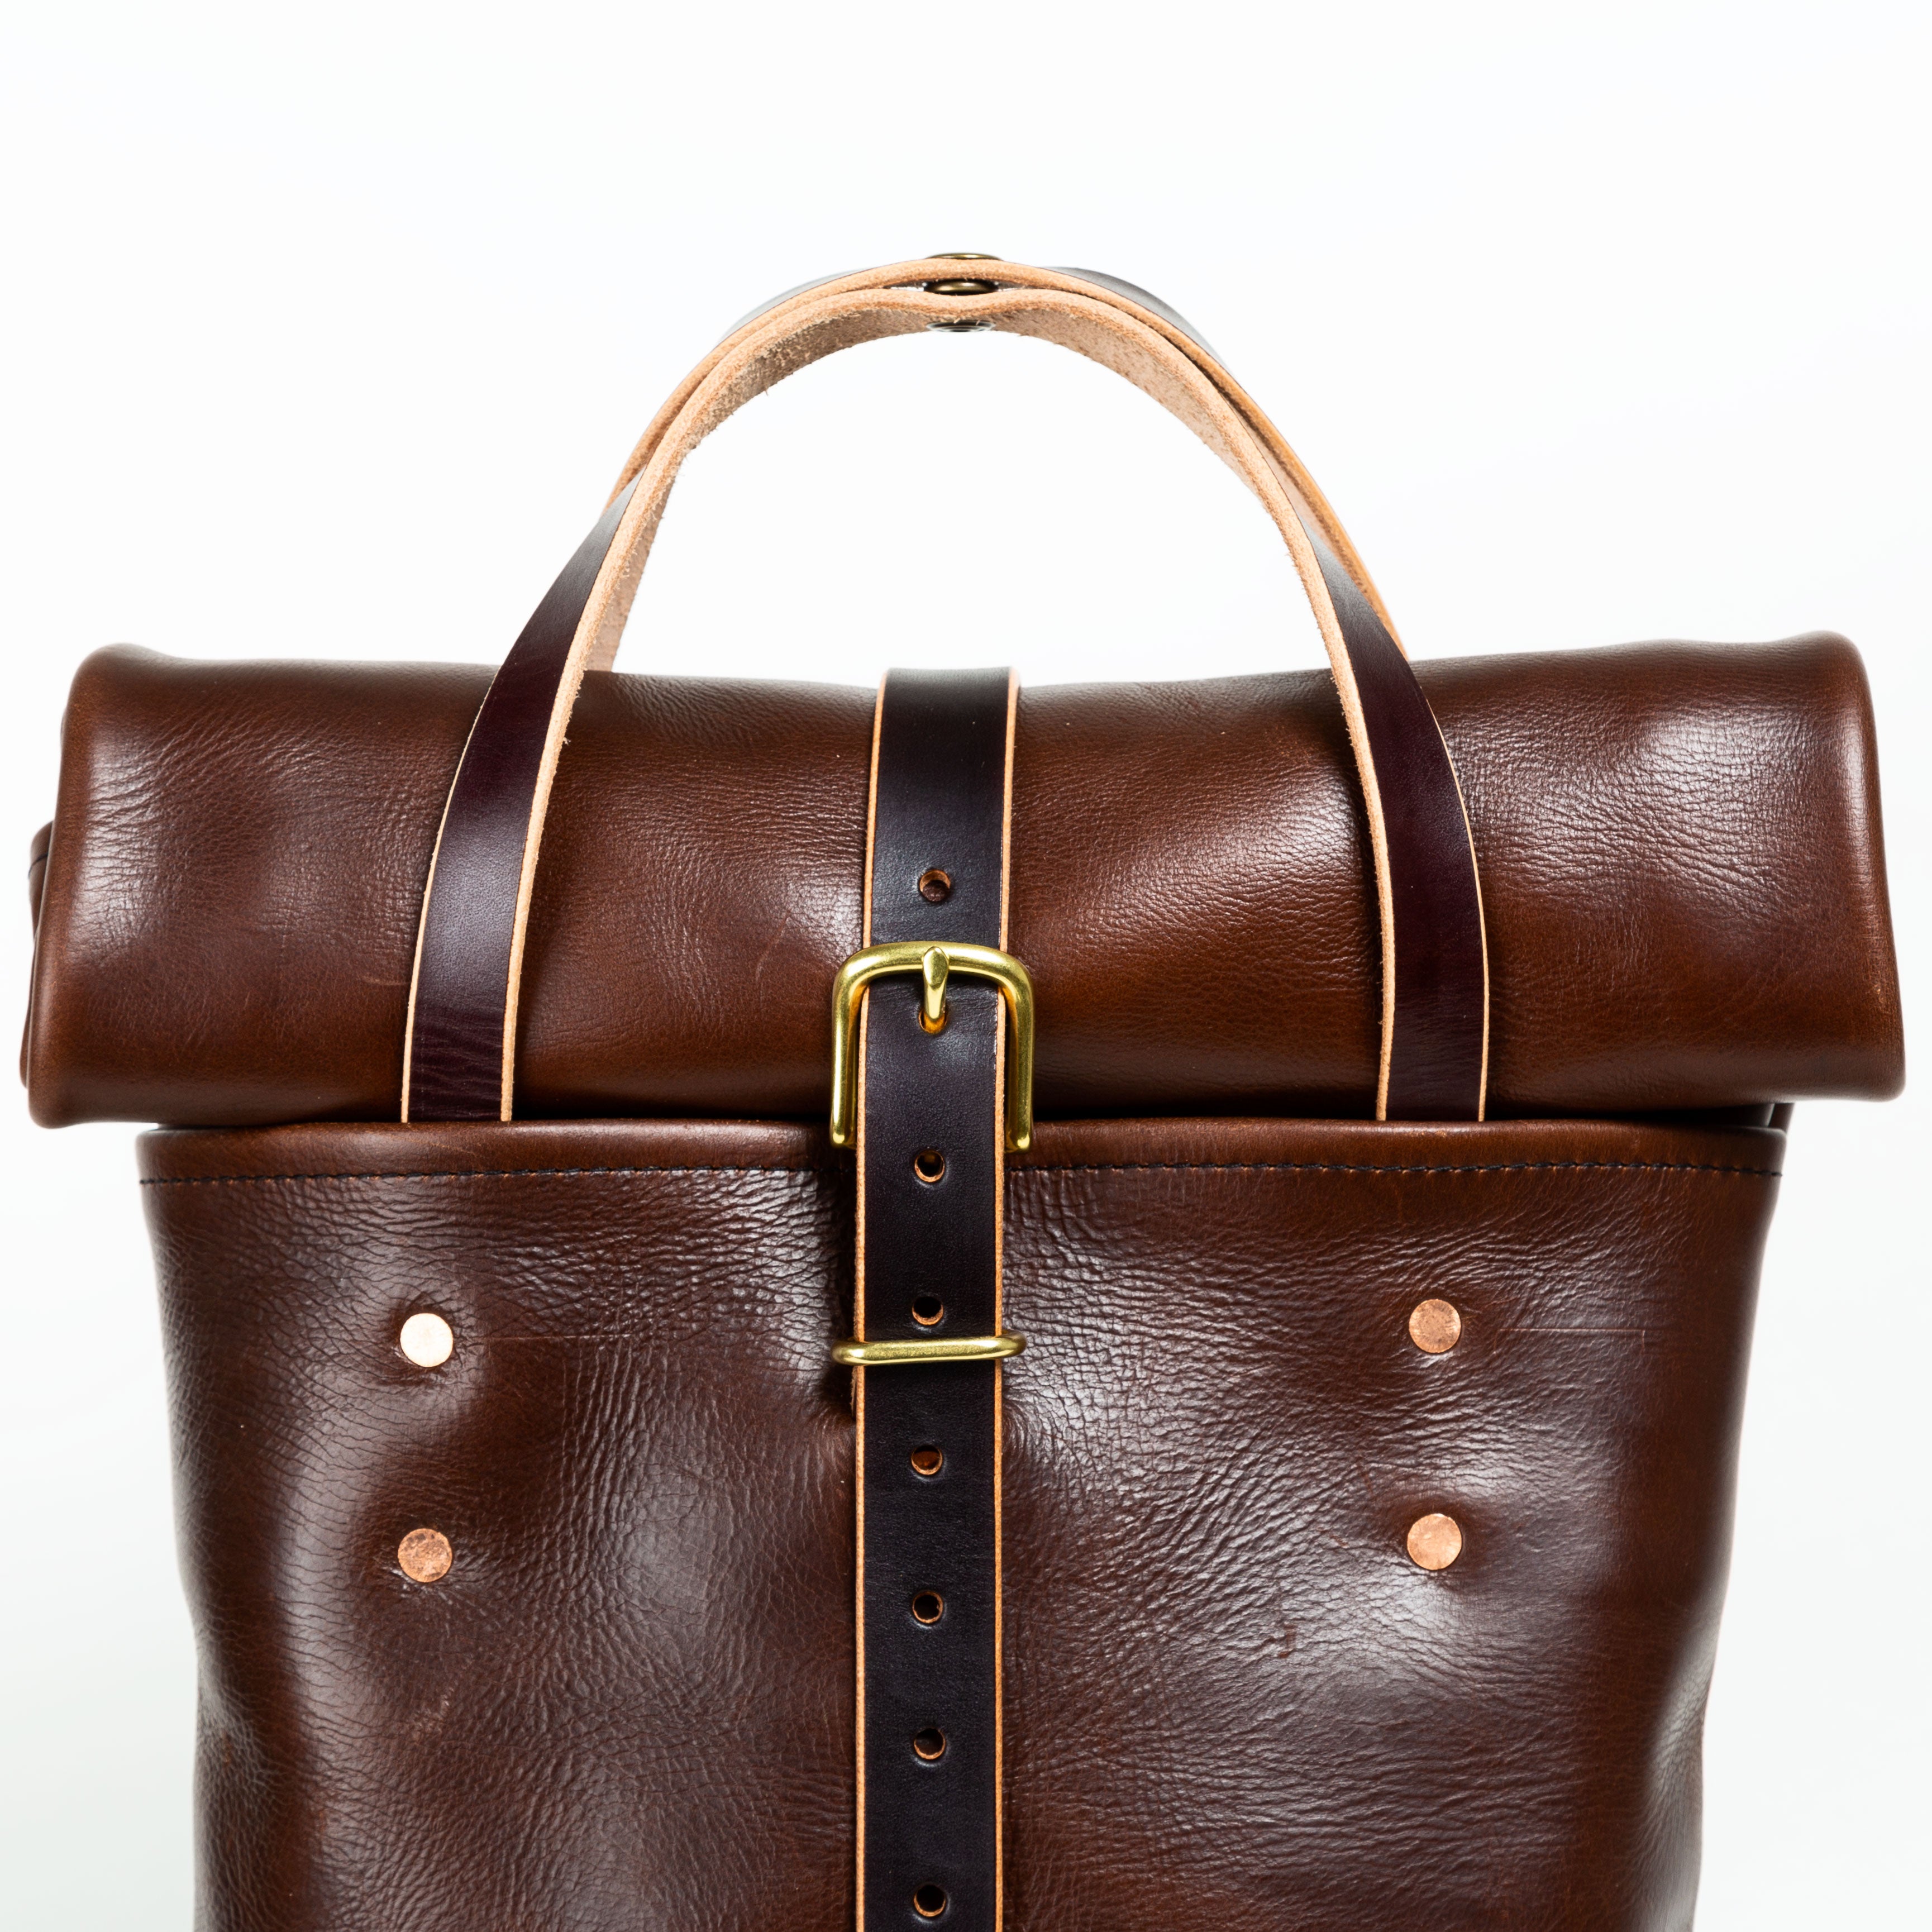 The Rolltop Backpack - Hickory